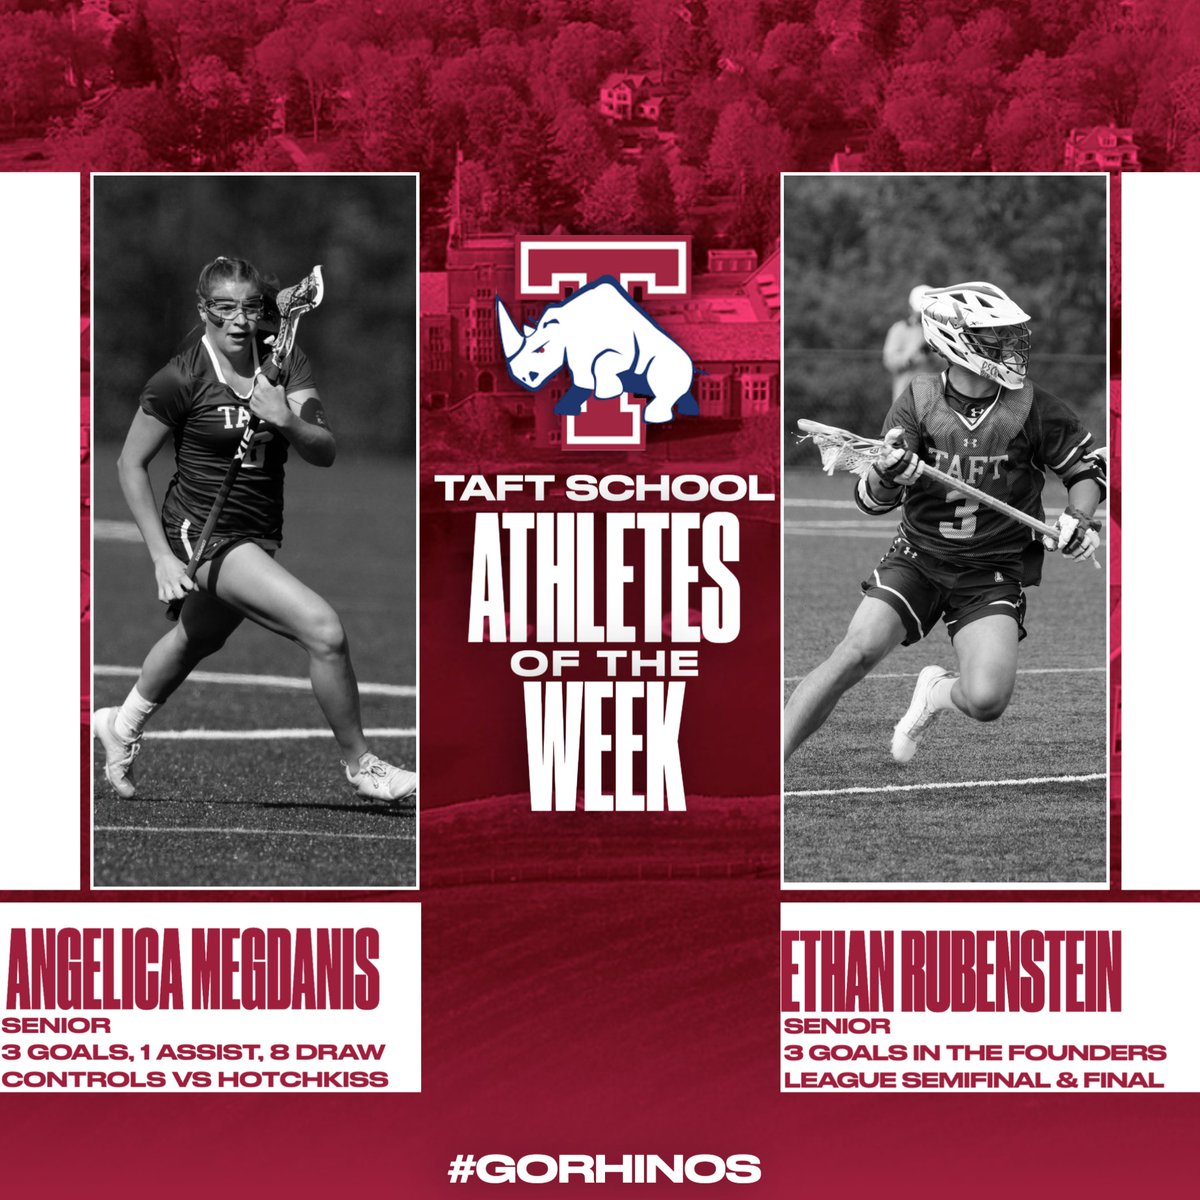 Angelica Megdanis '23 contributed 3 goals, 1 assist, and 8 draw controls in the Founders Championship for @taftgvlax

Ethan Rubenstein '23  posted hat tricks🎩 in the Founders Semifinal & Final to help @taftbvlax win a title!

🦏🥍 #taftathletics #gorhinos #gobigred #wearetaft